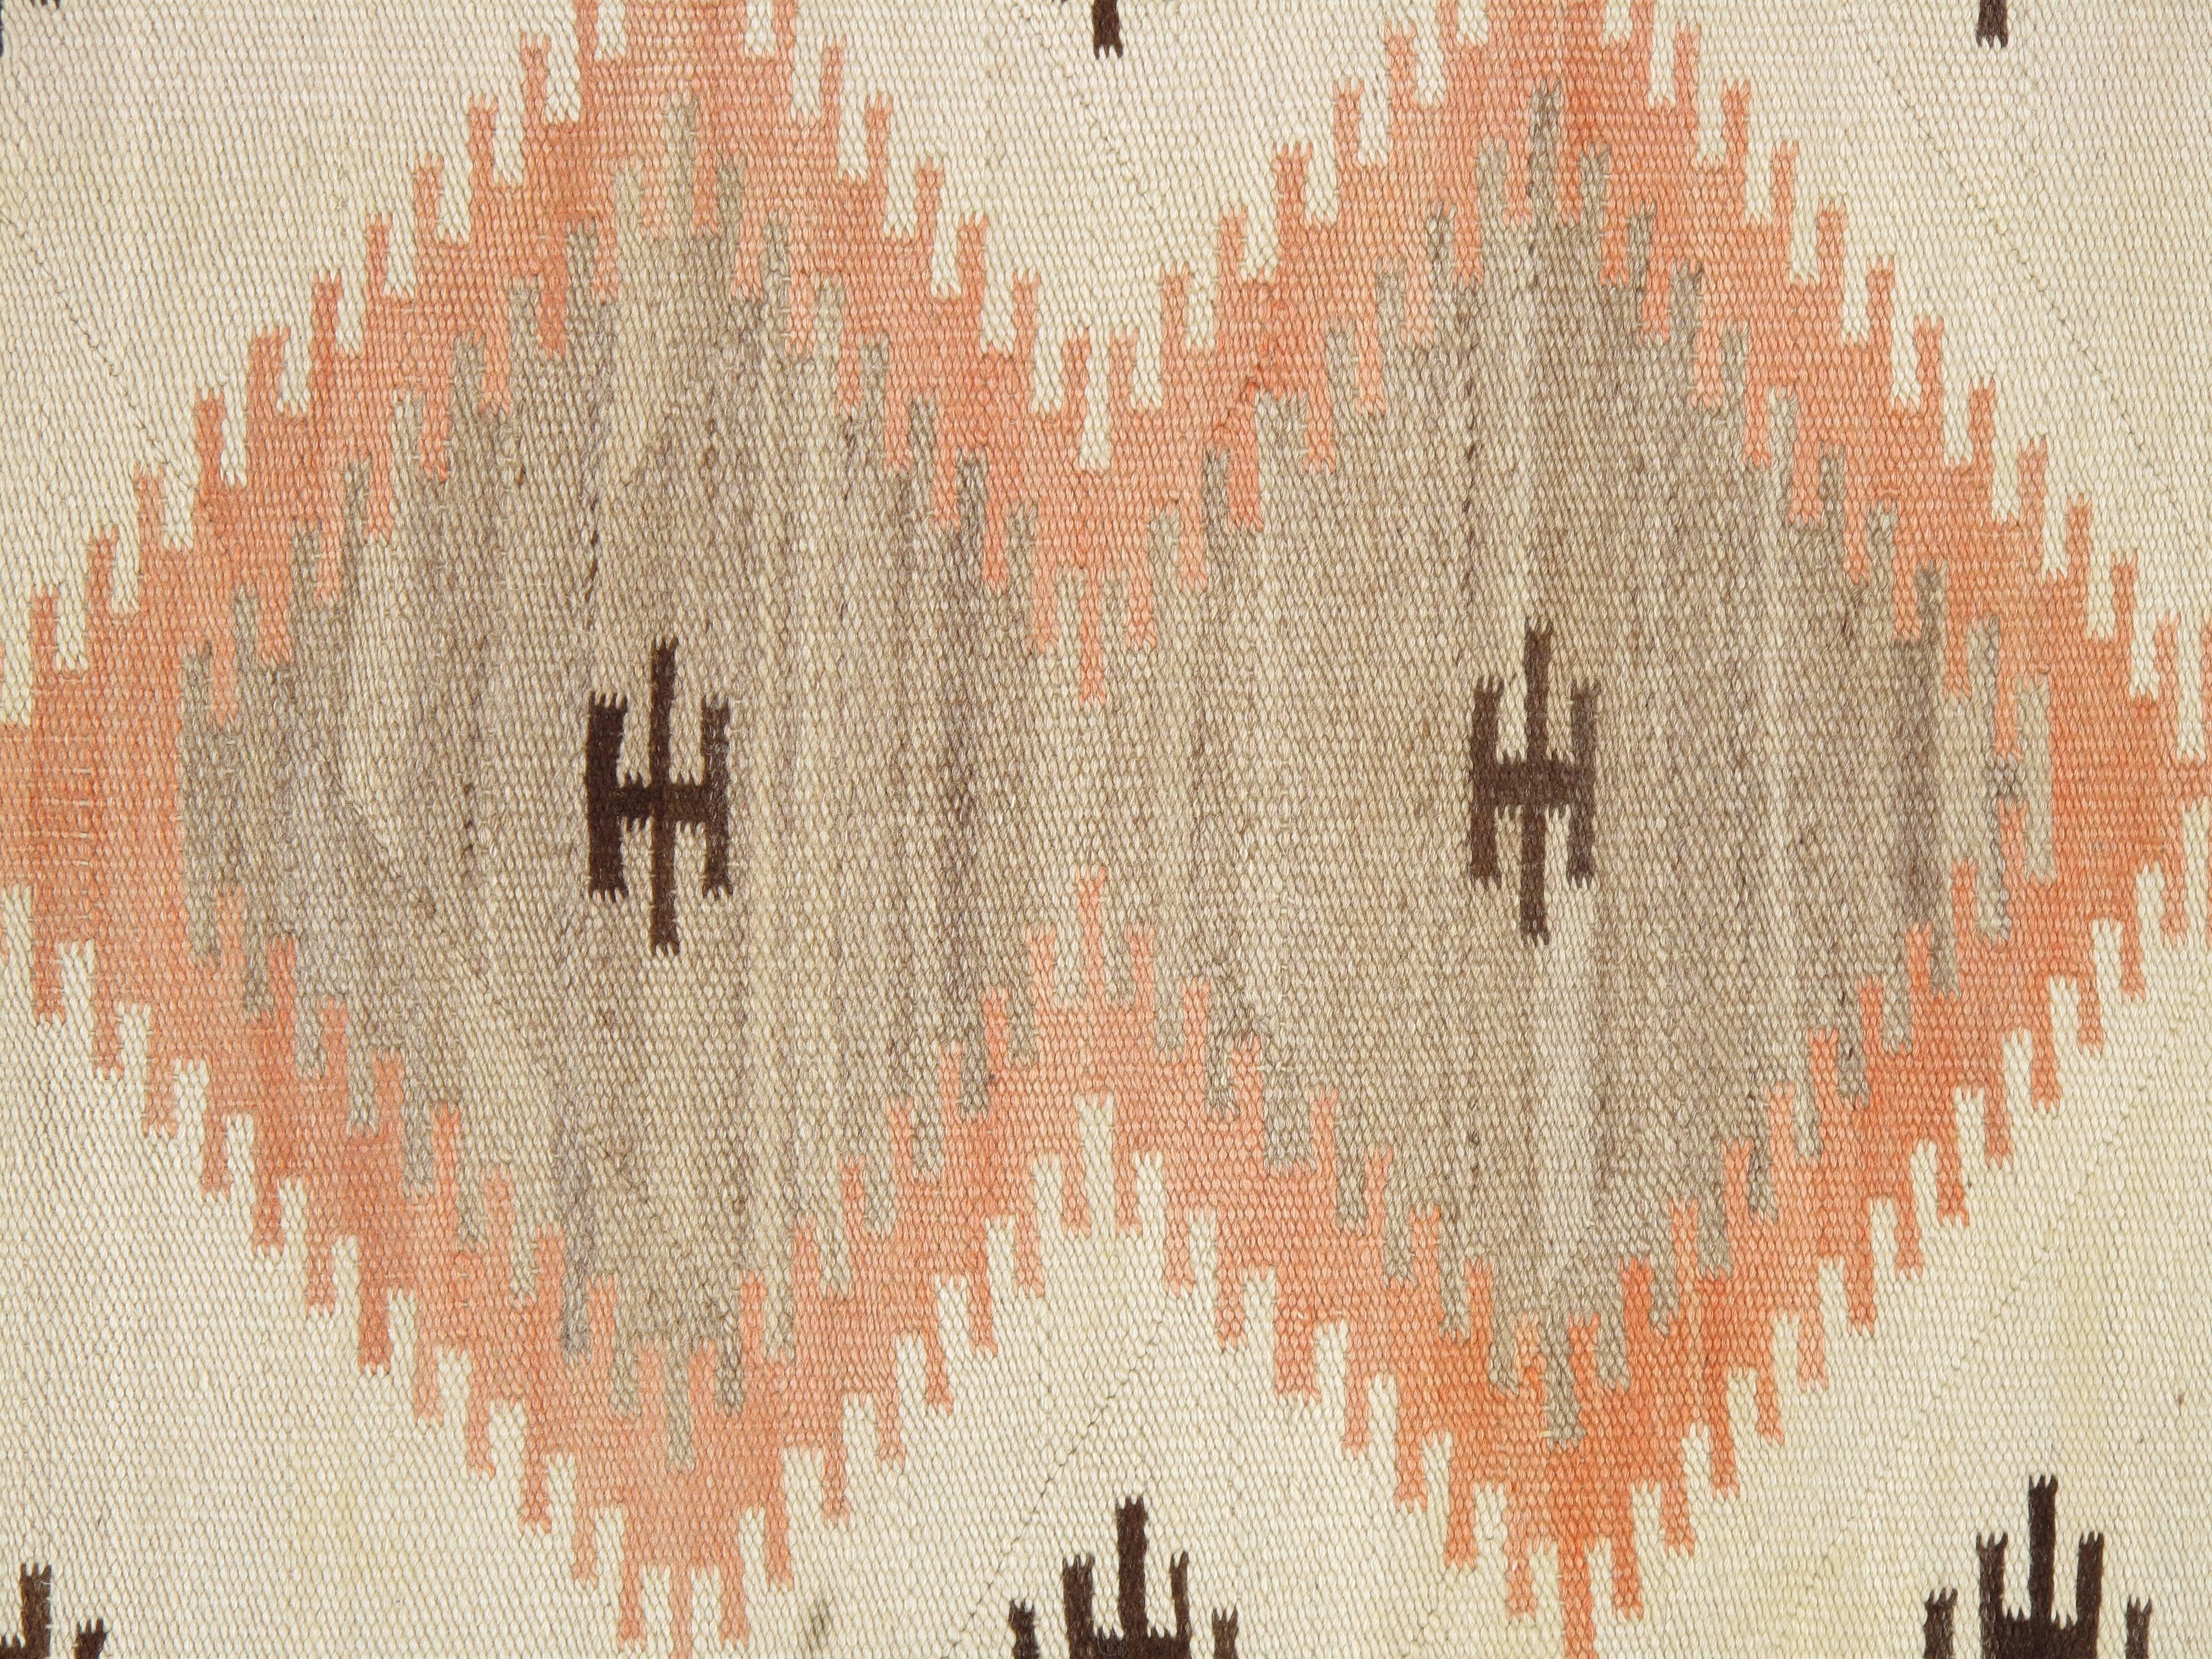 Navajo rugs and blankets are textiles produced by Navajo people of the Four Corners area of the United States. Navajo textiles are highly regarded and have been sought after as trade items for over 150 years. These rugs and blankets are prized by